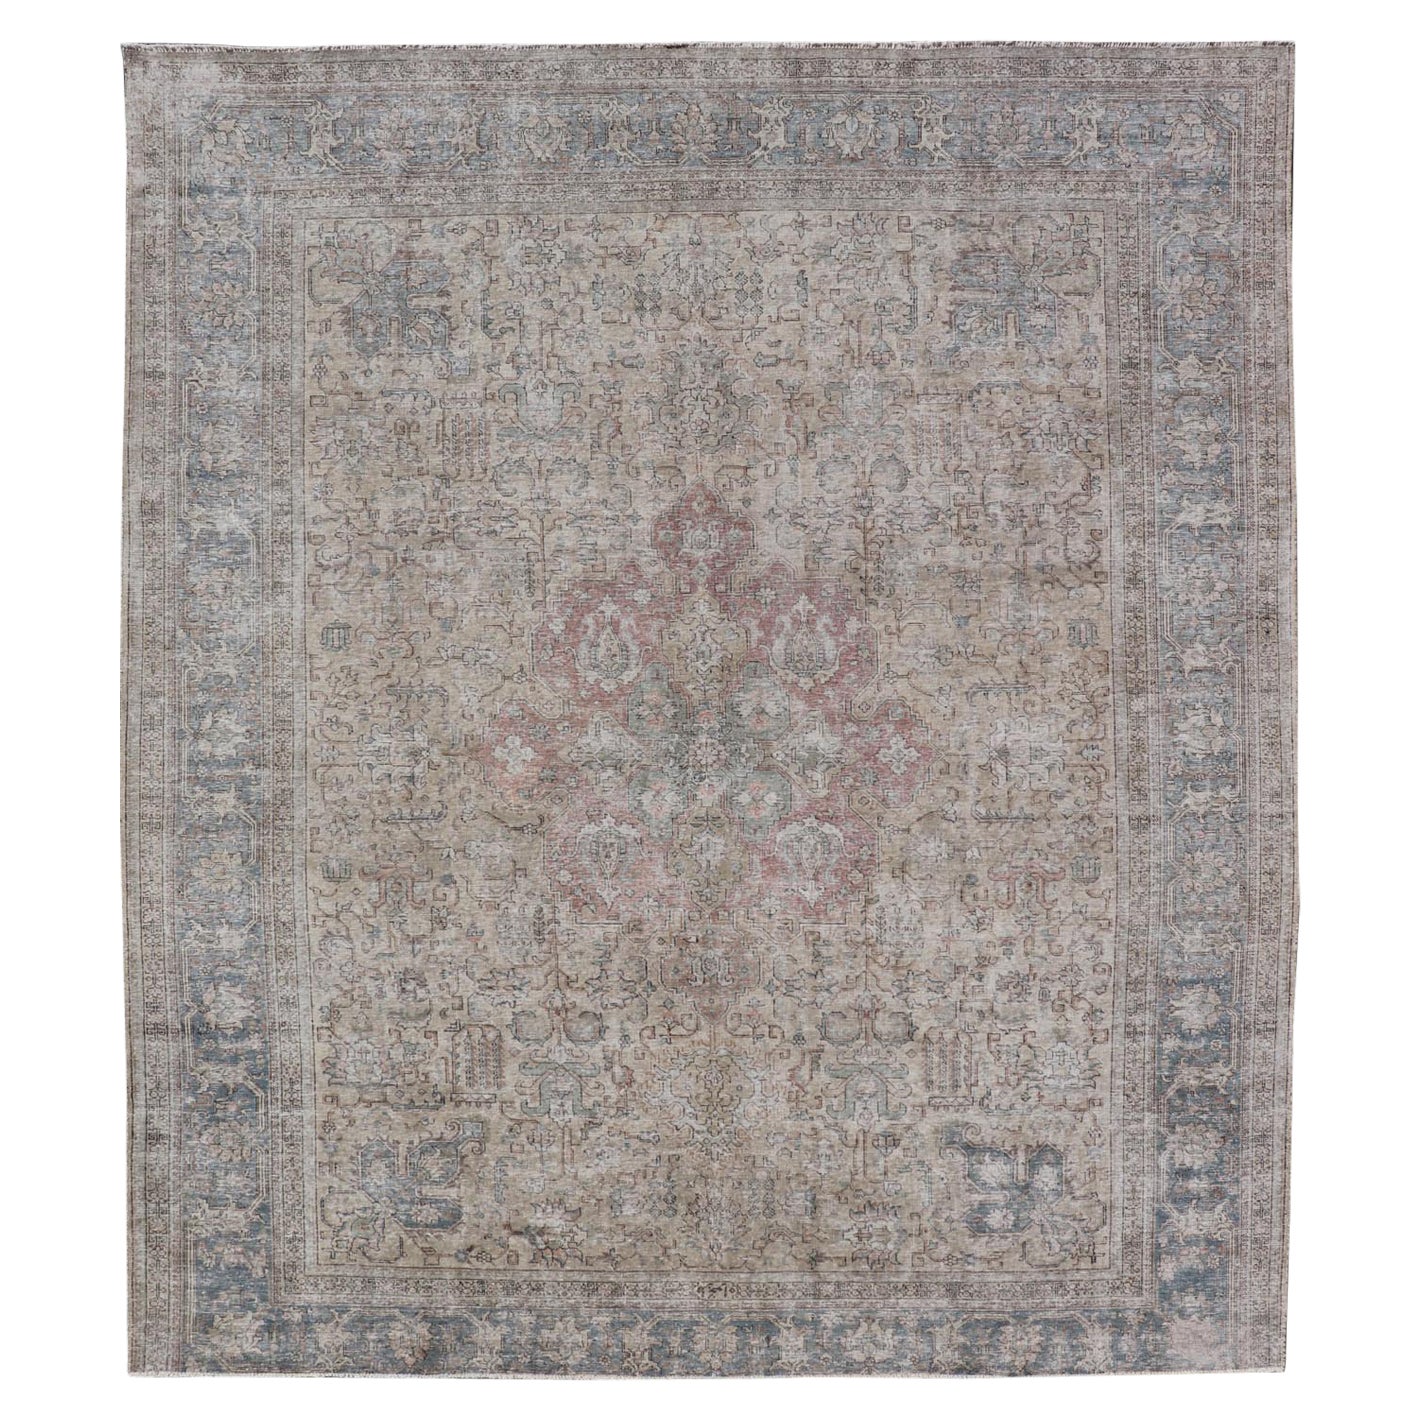 Vintage Distressed Persian Tabriz Rug in  Light Blue and Earth Tones For Sale